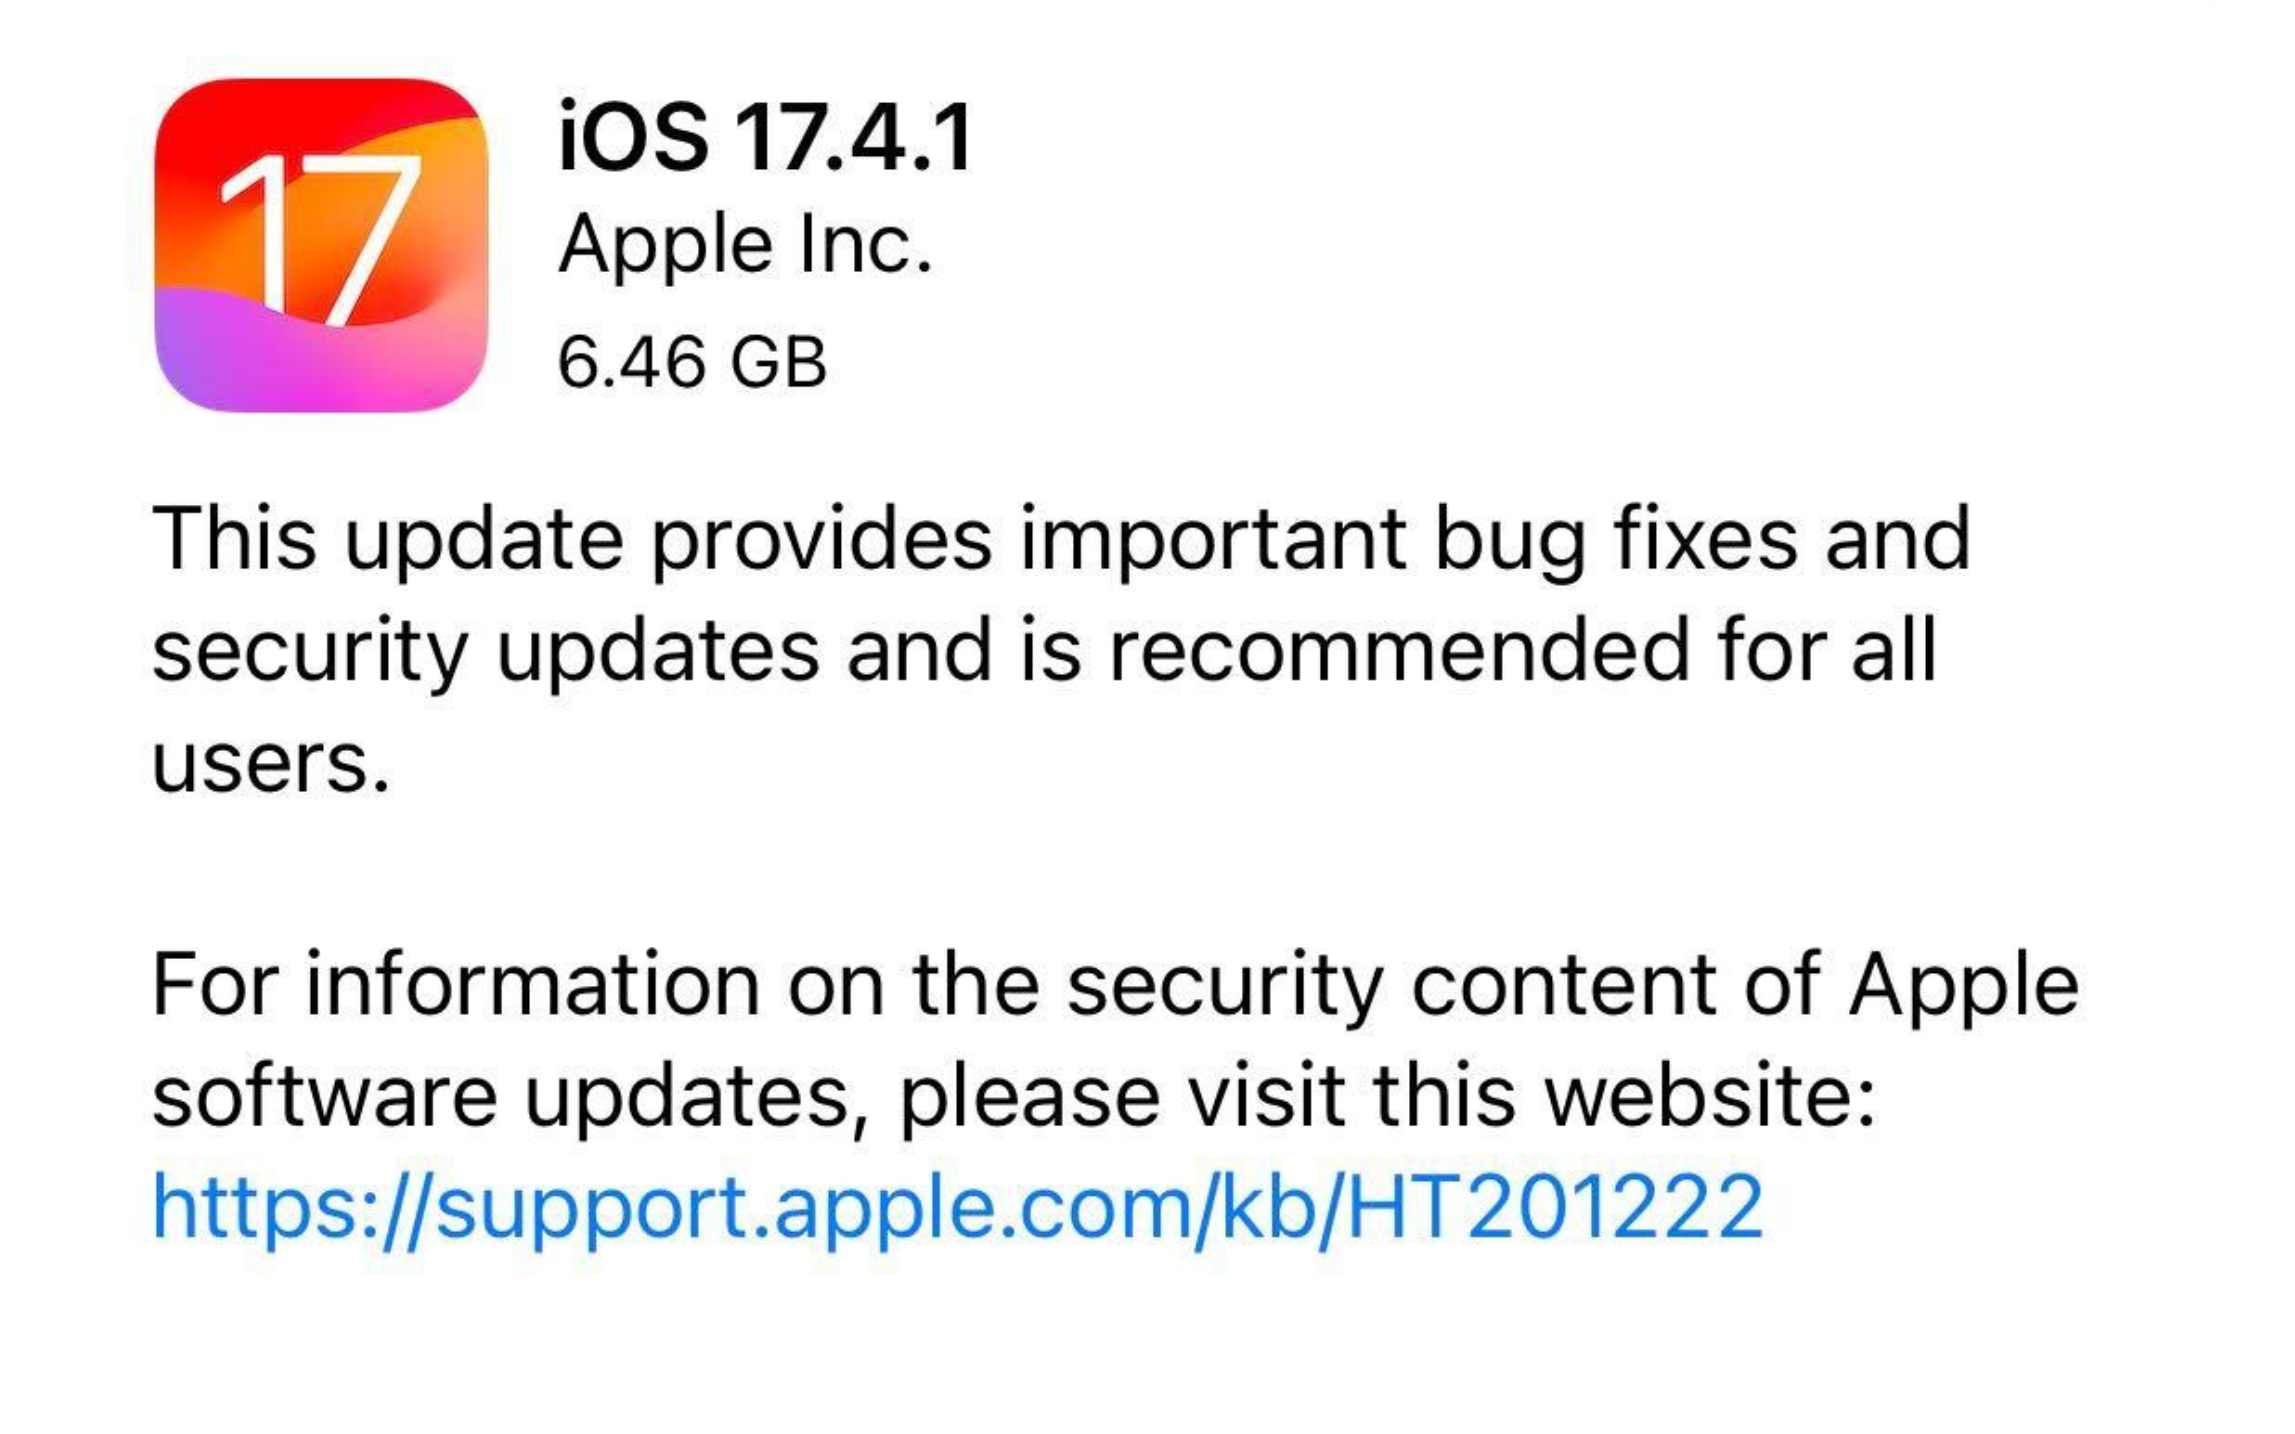 iOS 17.4.1 for iPhone users include security updates and bug fixes